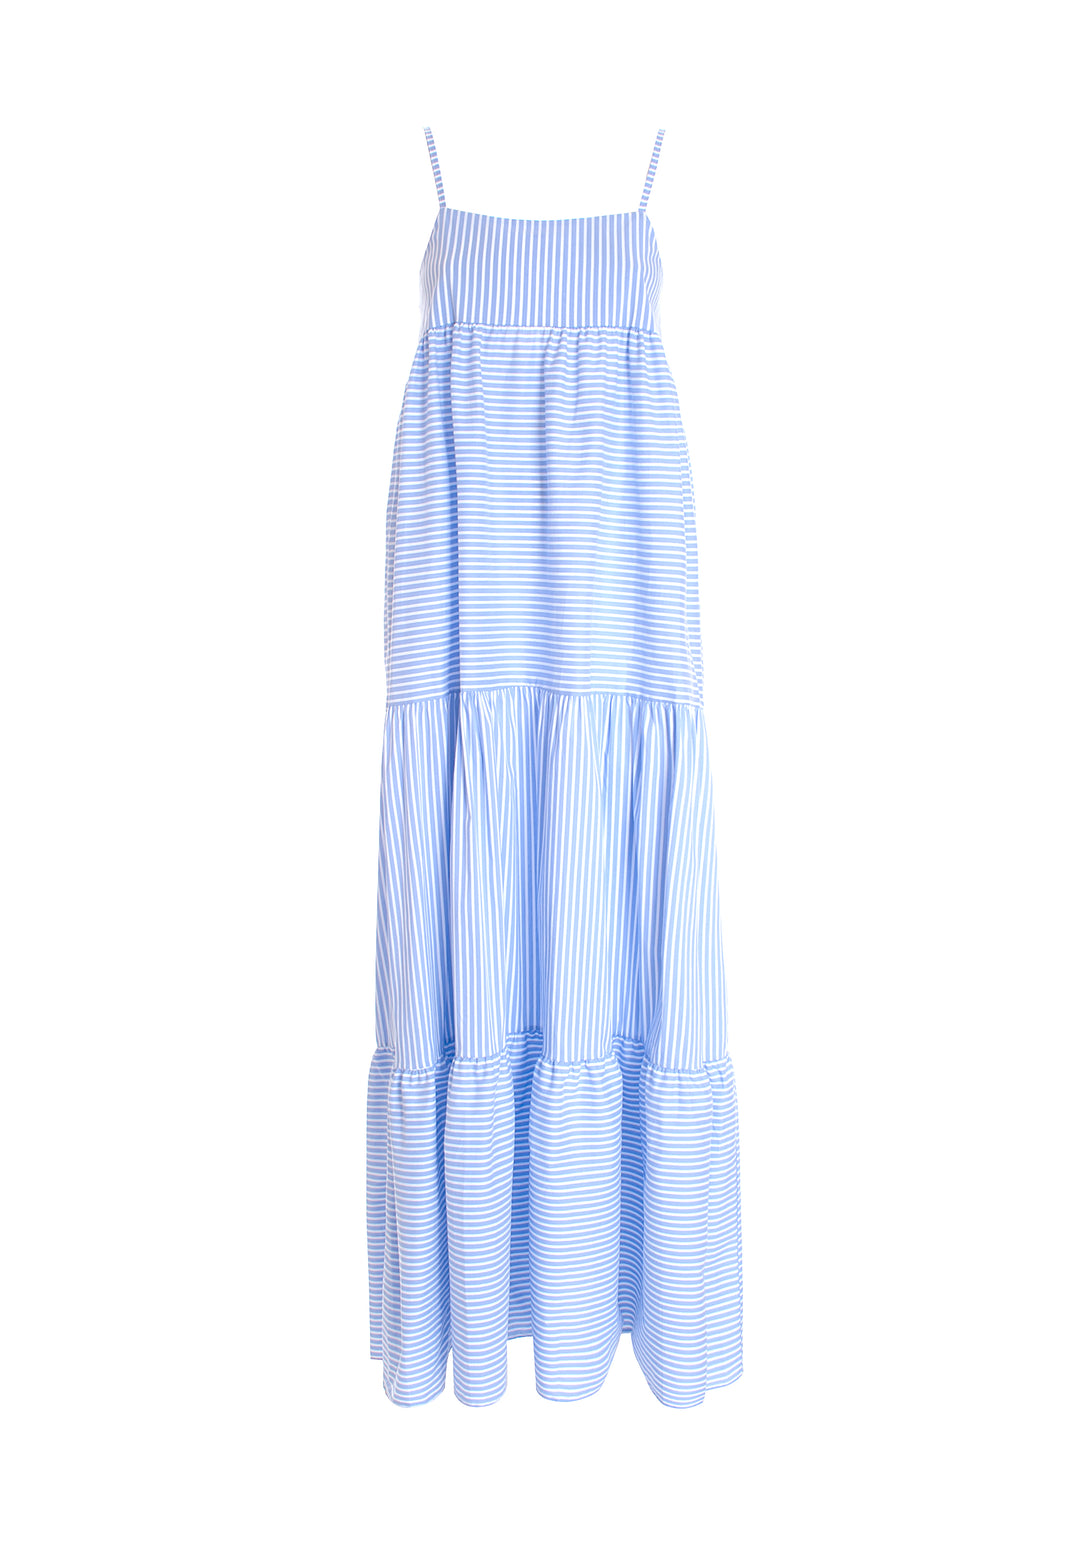 Dress with no sleeves made in striped cotton